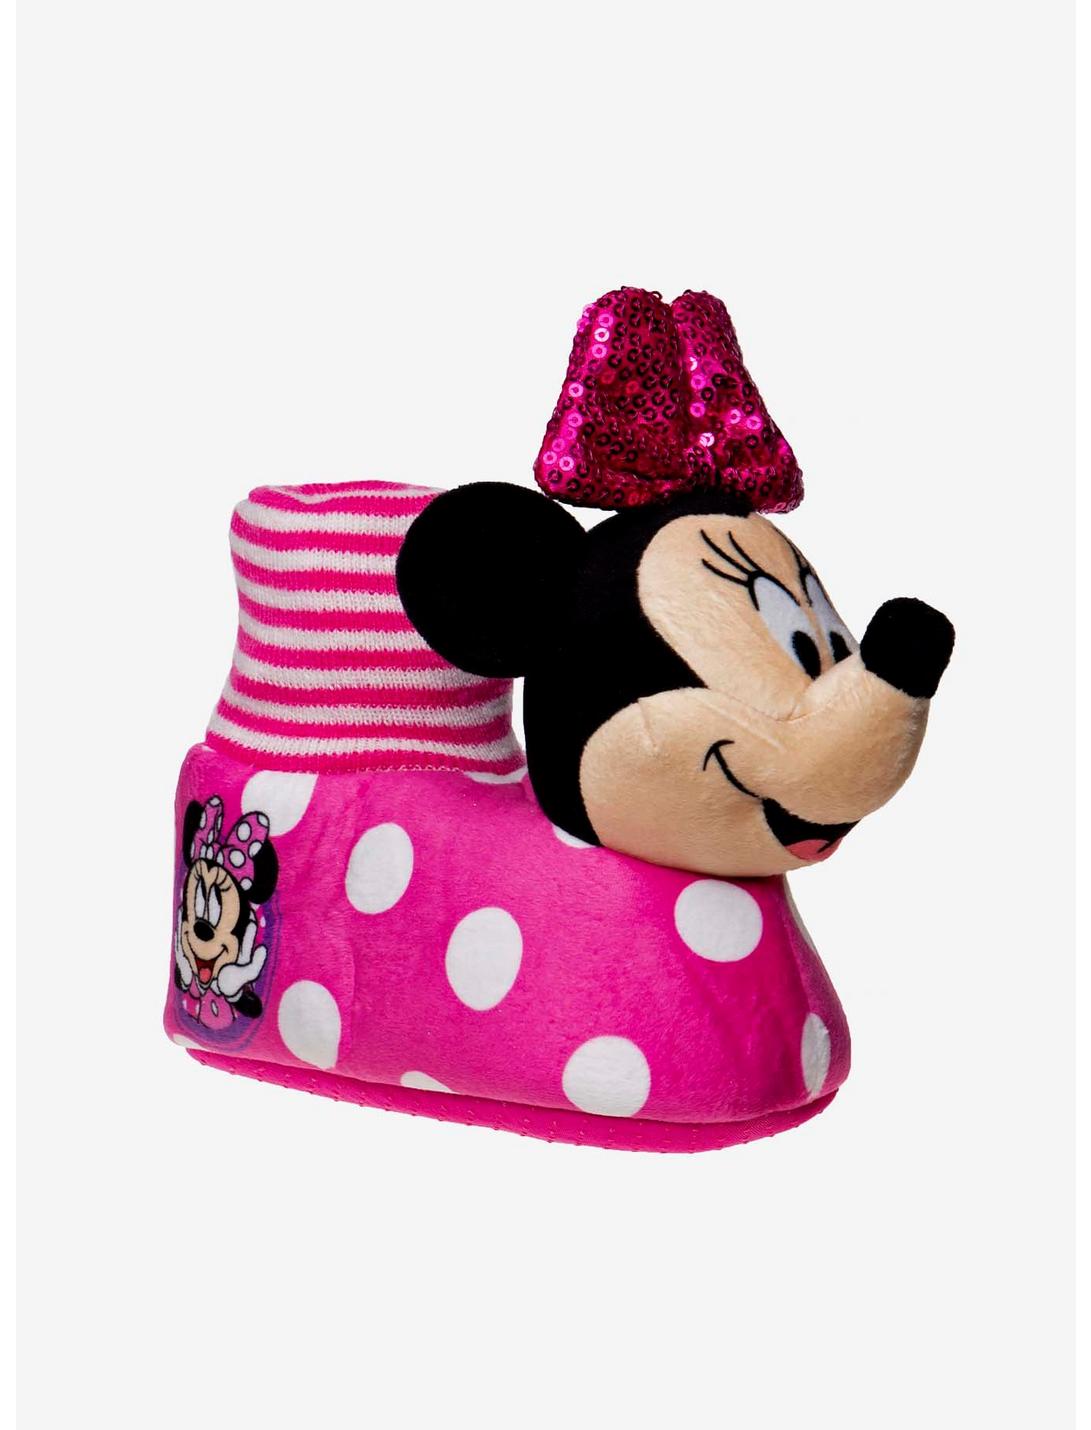 Disney Minnie Mouse Toddler Slippers Pink, PINK, hi-res